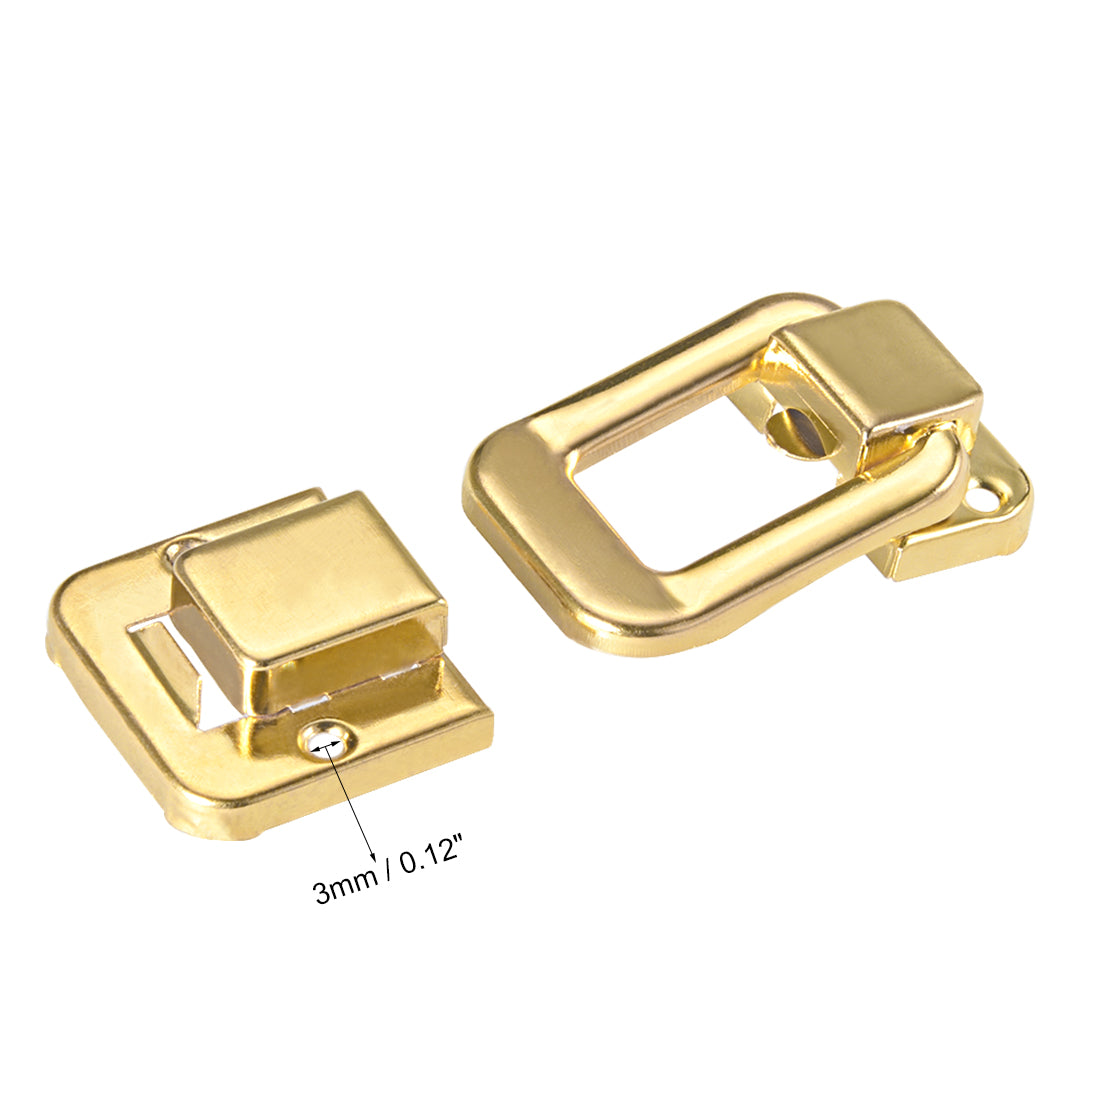 uxcell Uxcell Toggle Latch, 48mm Retro Style Golden Decorative Hasp Jewelry Box Catch w Screws 5 pcs